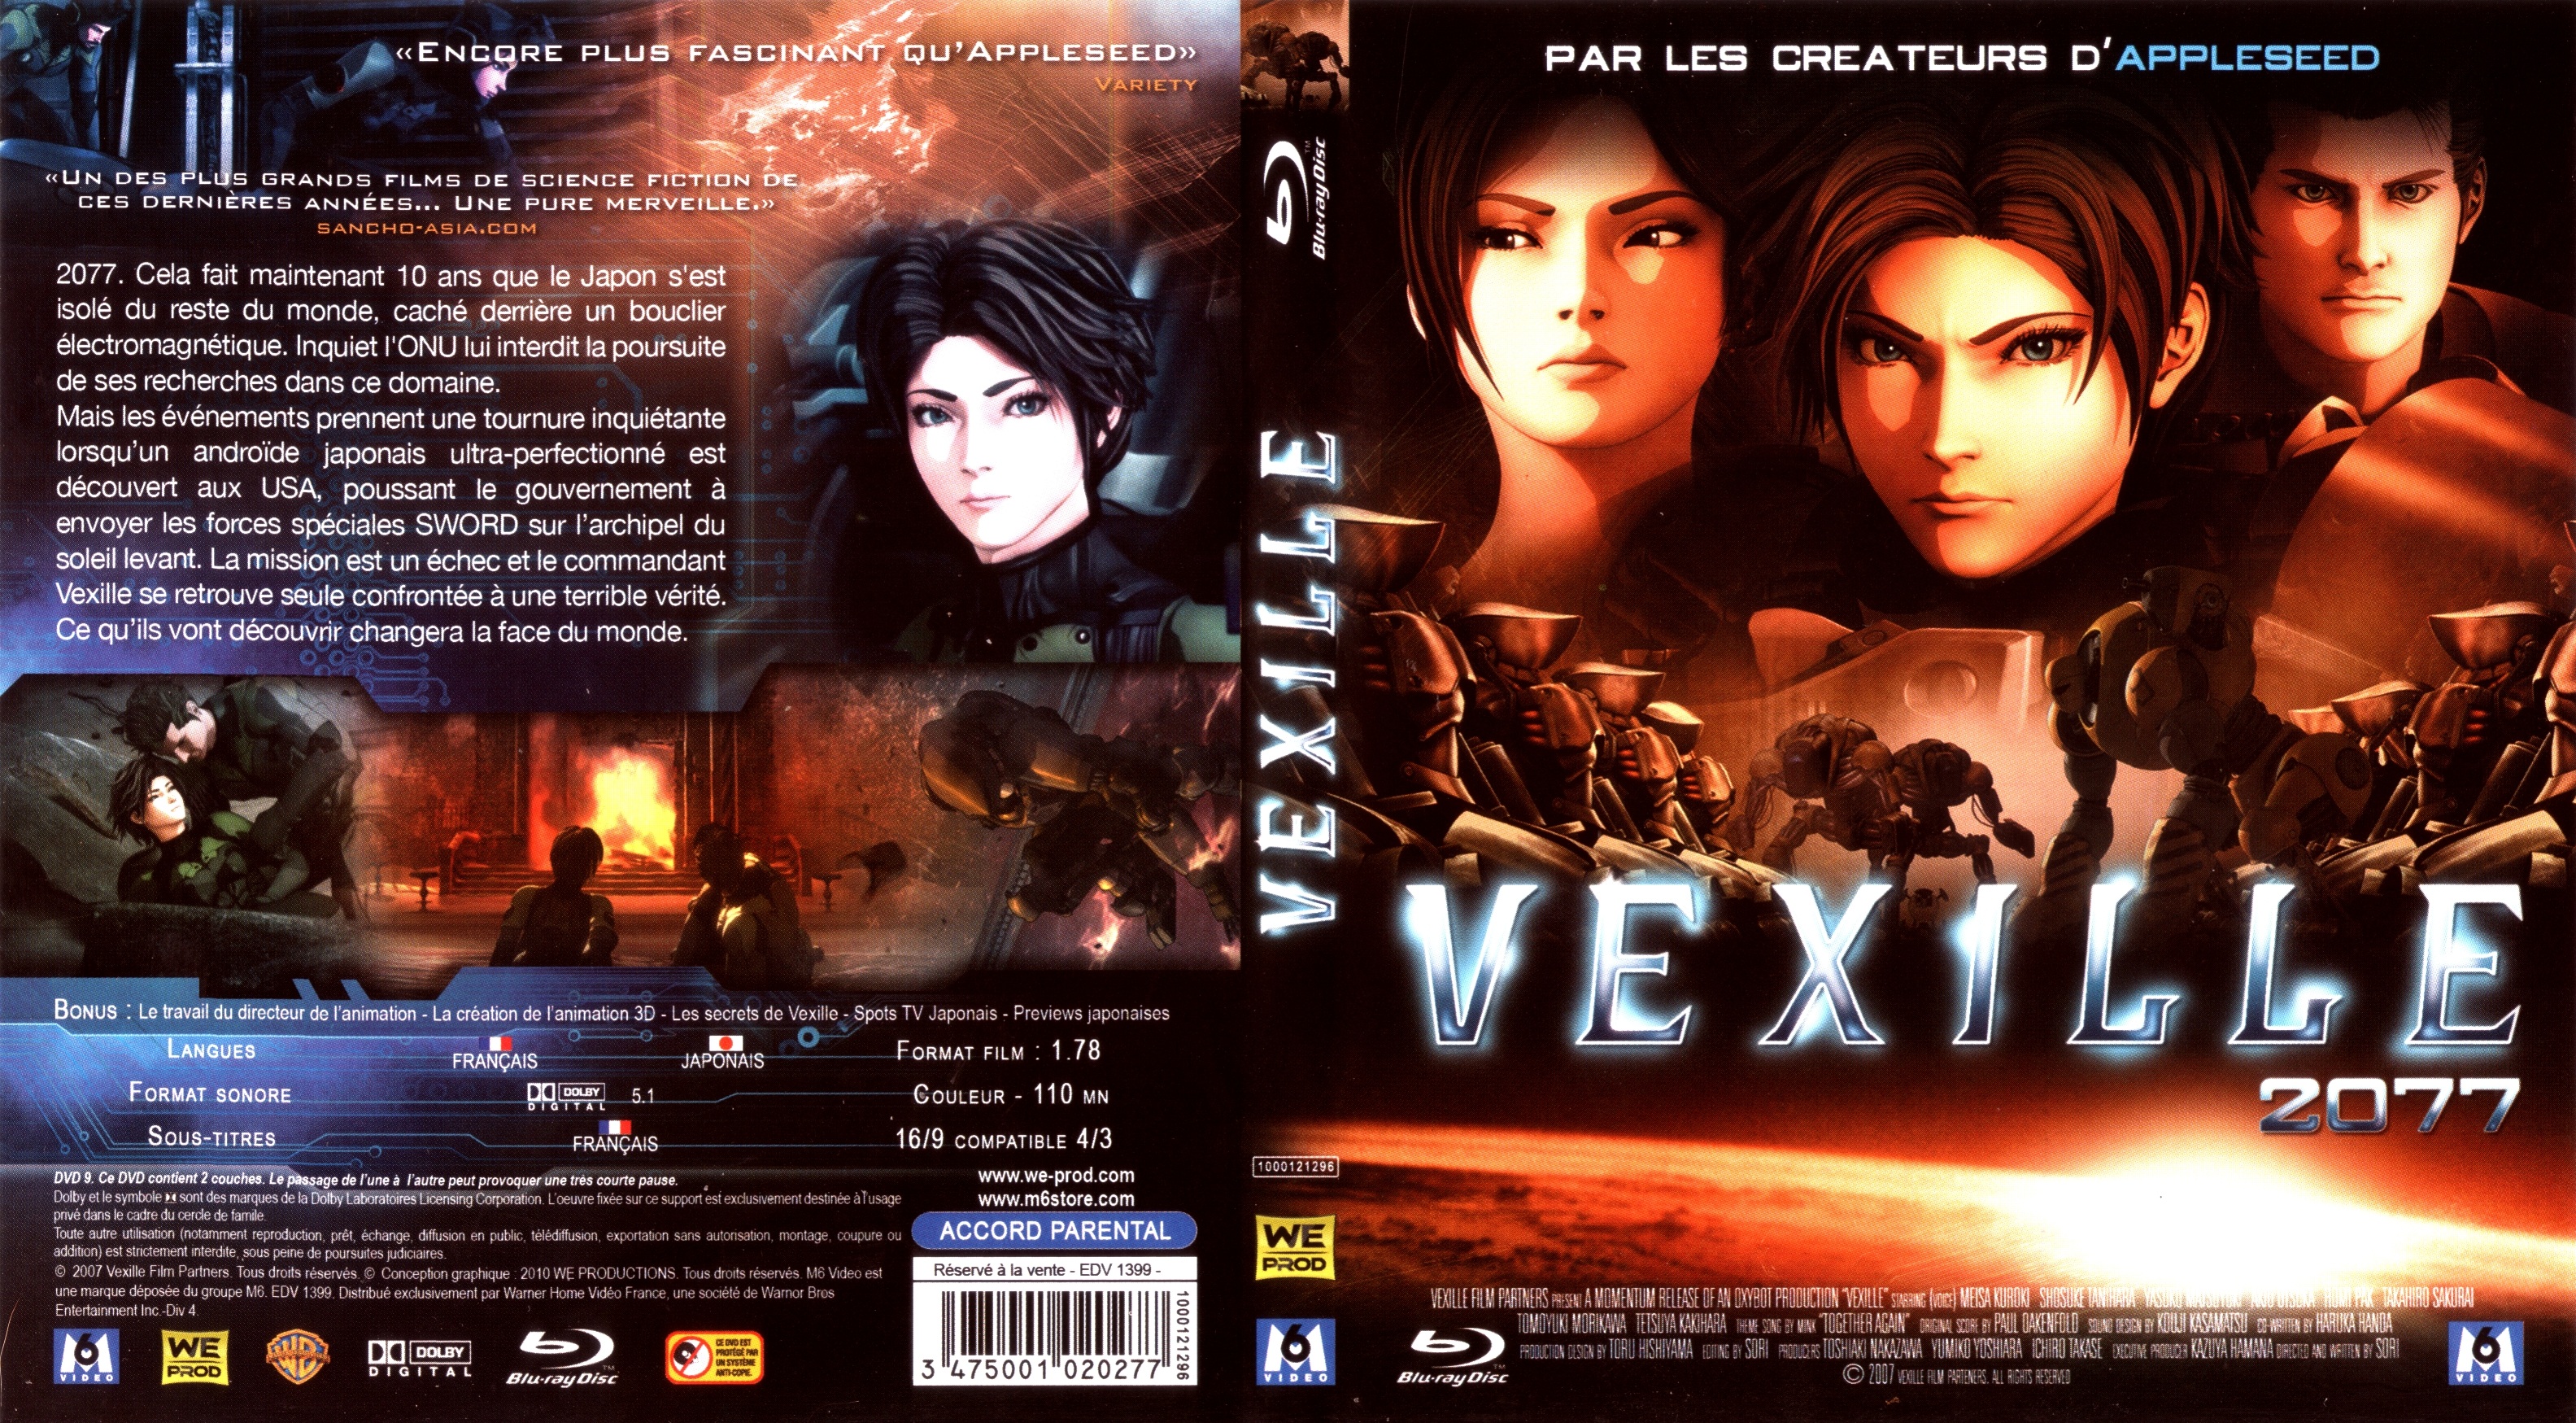 Jaquette DVD Vexille 2077 (BLU-RAY)